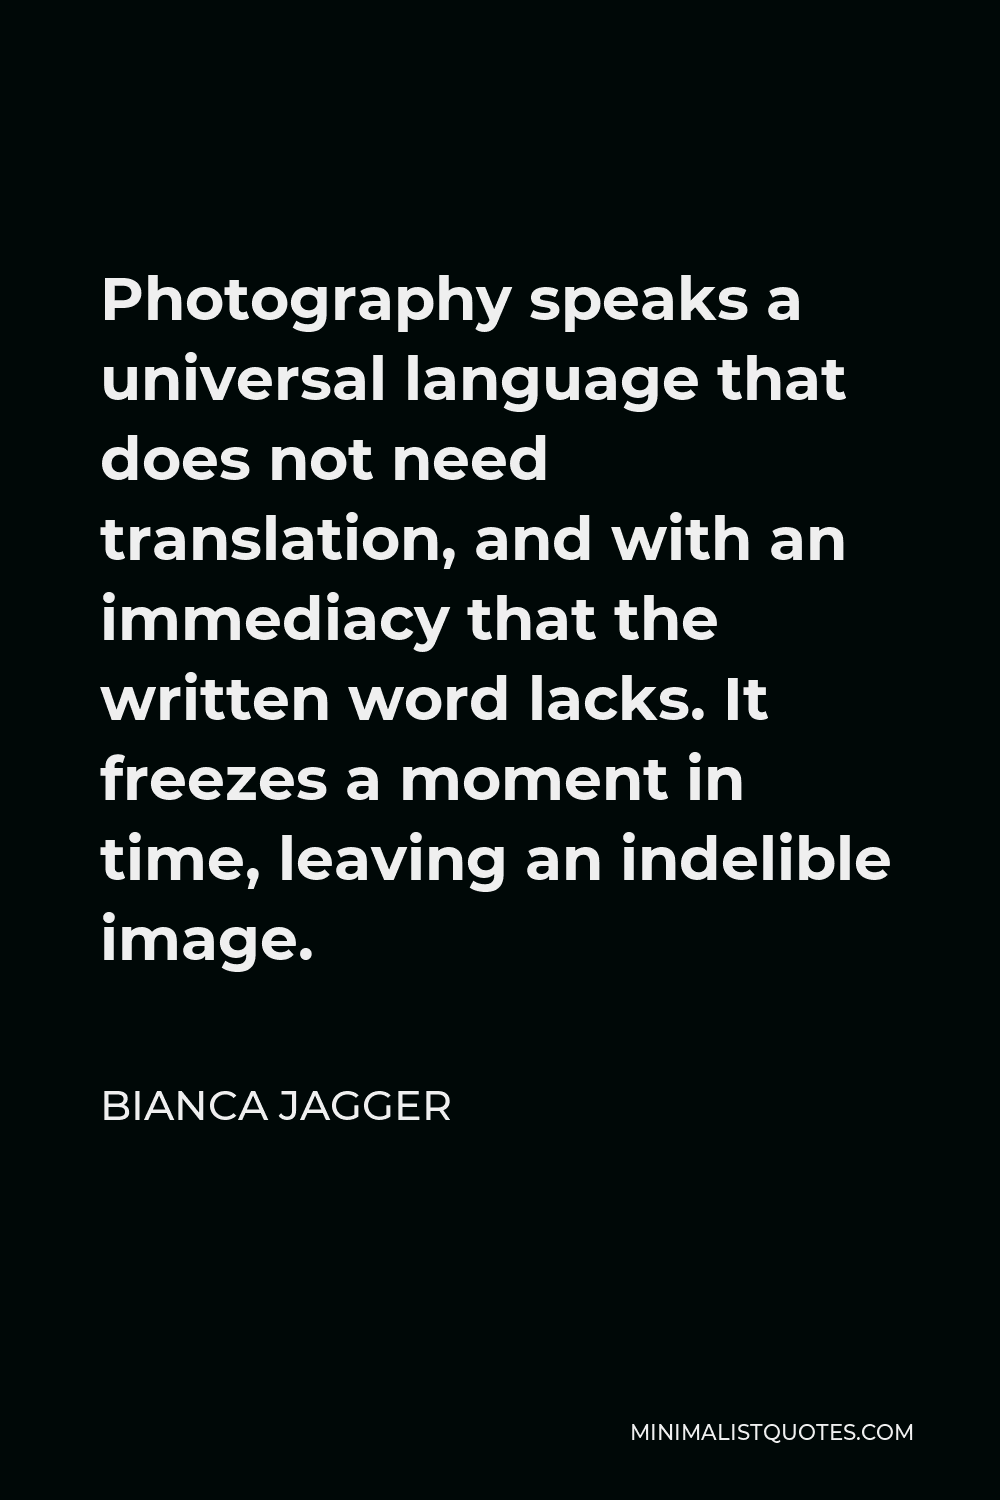 Bianca Jagger Quote - Photography speaks a universal language that does not need translation, and with an immediacy that the written word lacks. It freezes a moment in time, leaving an indelible image.